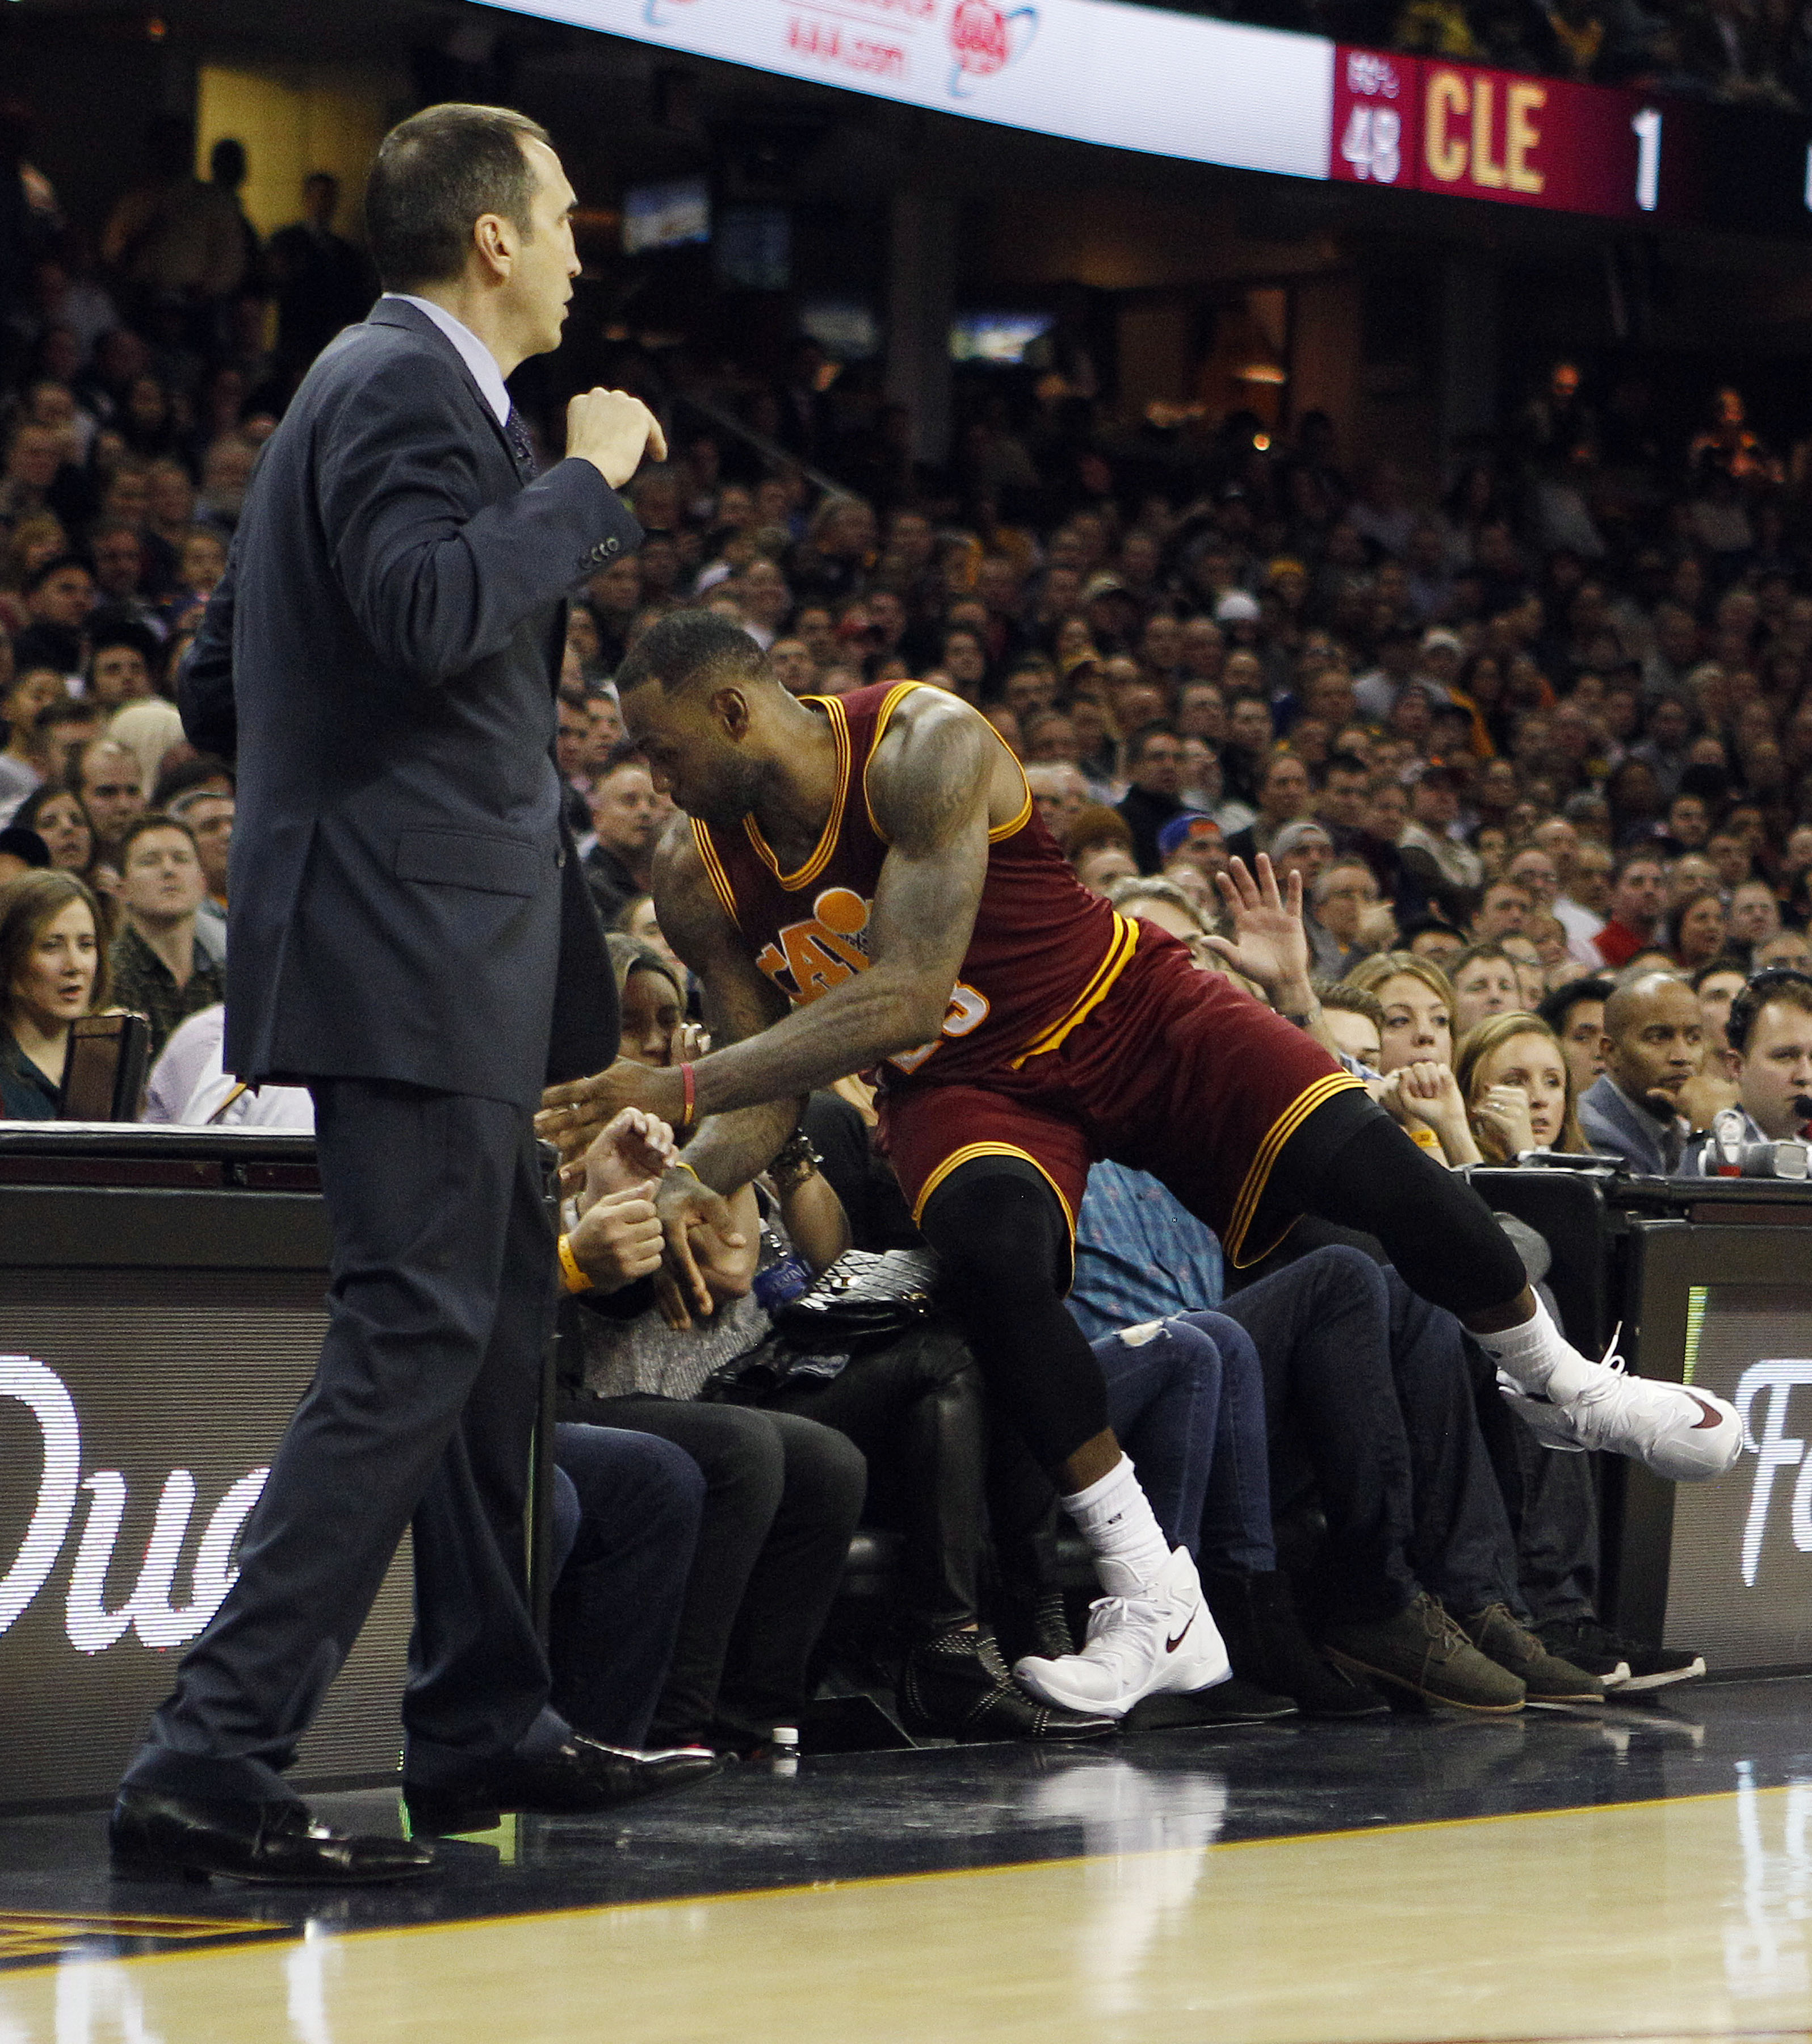 Cleveland Cavaliers goes into the stands after a loose ball and crashes into Jason Day's wife